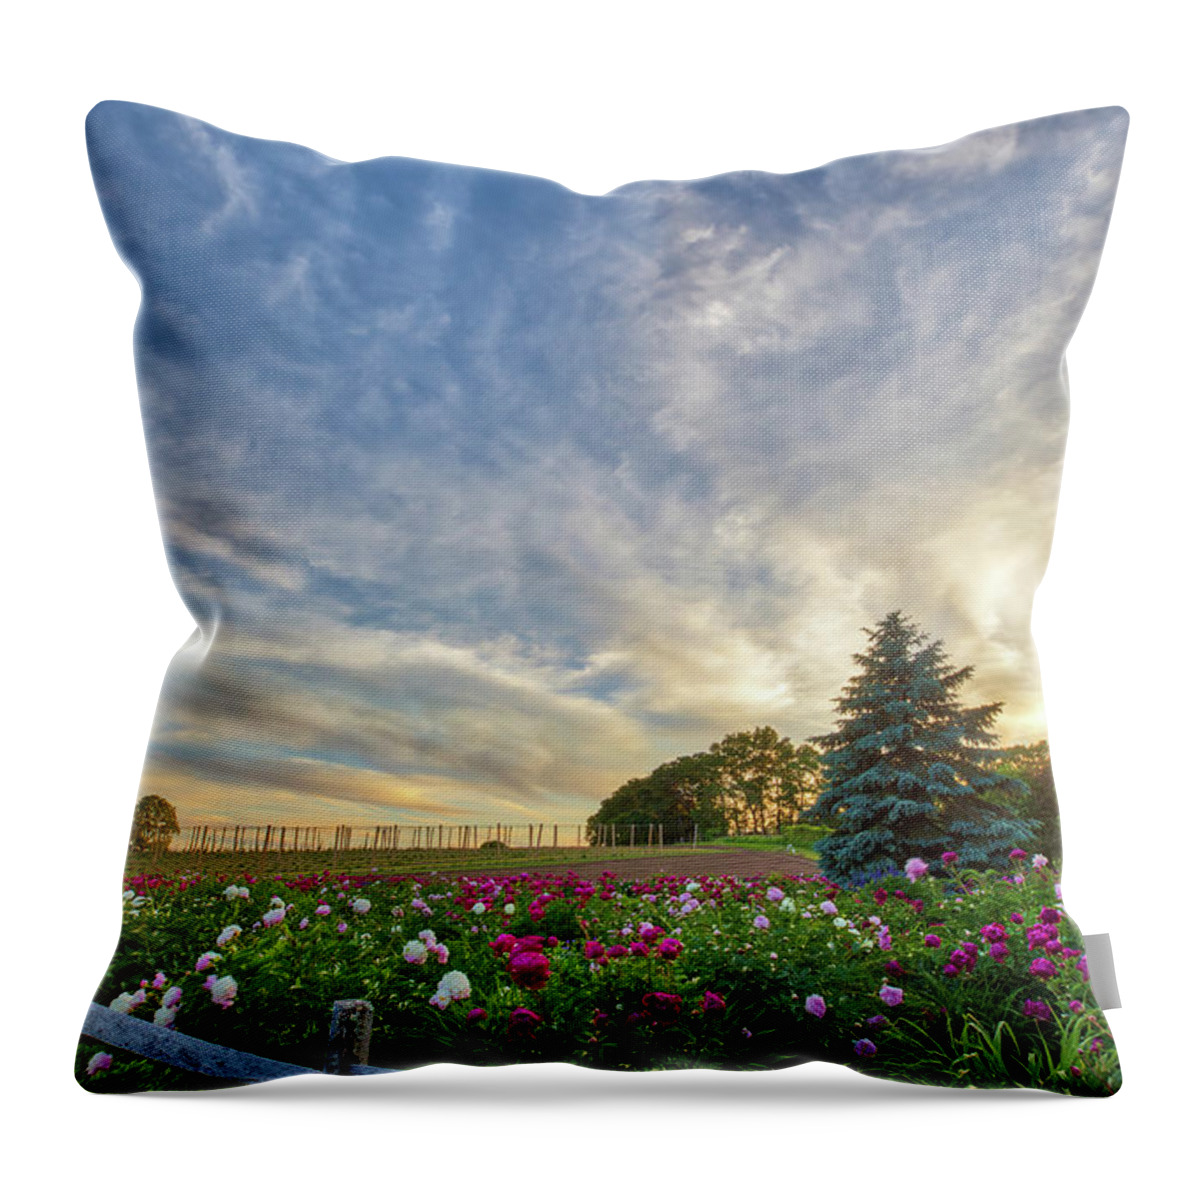 Belkin Family Lookout Farm Throw Pillow featuring the photograph Belkin Family Lookout Farm by Juergen Roth